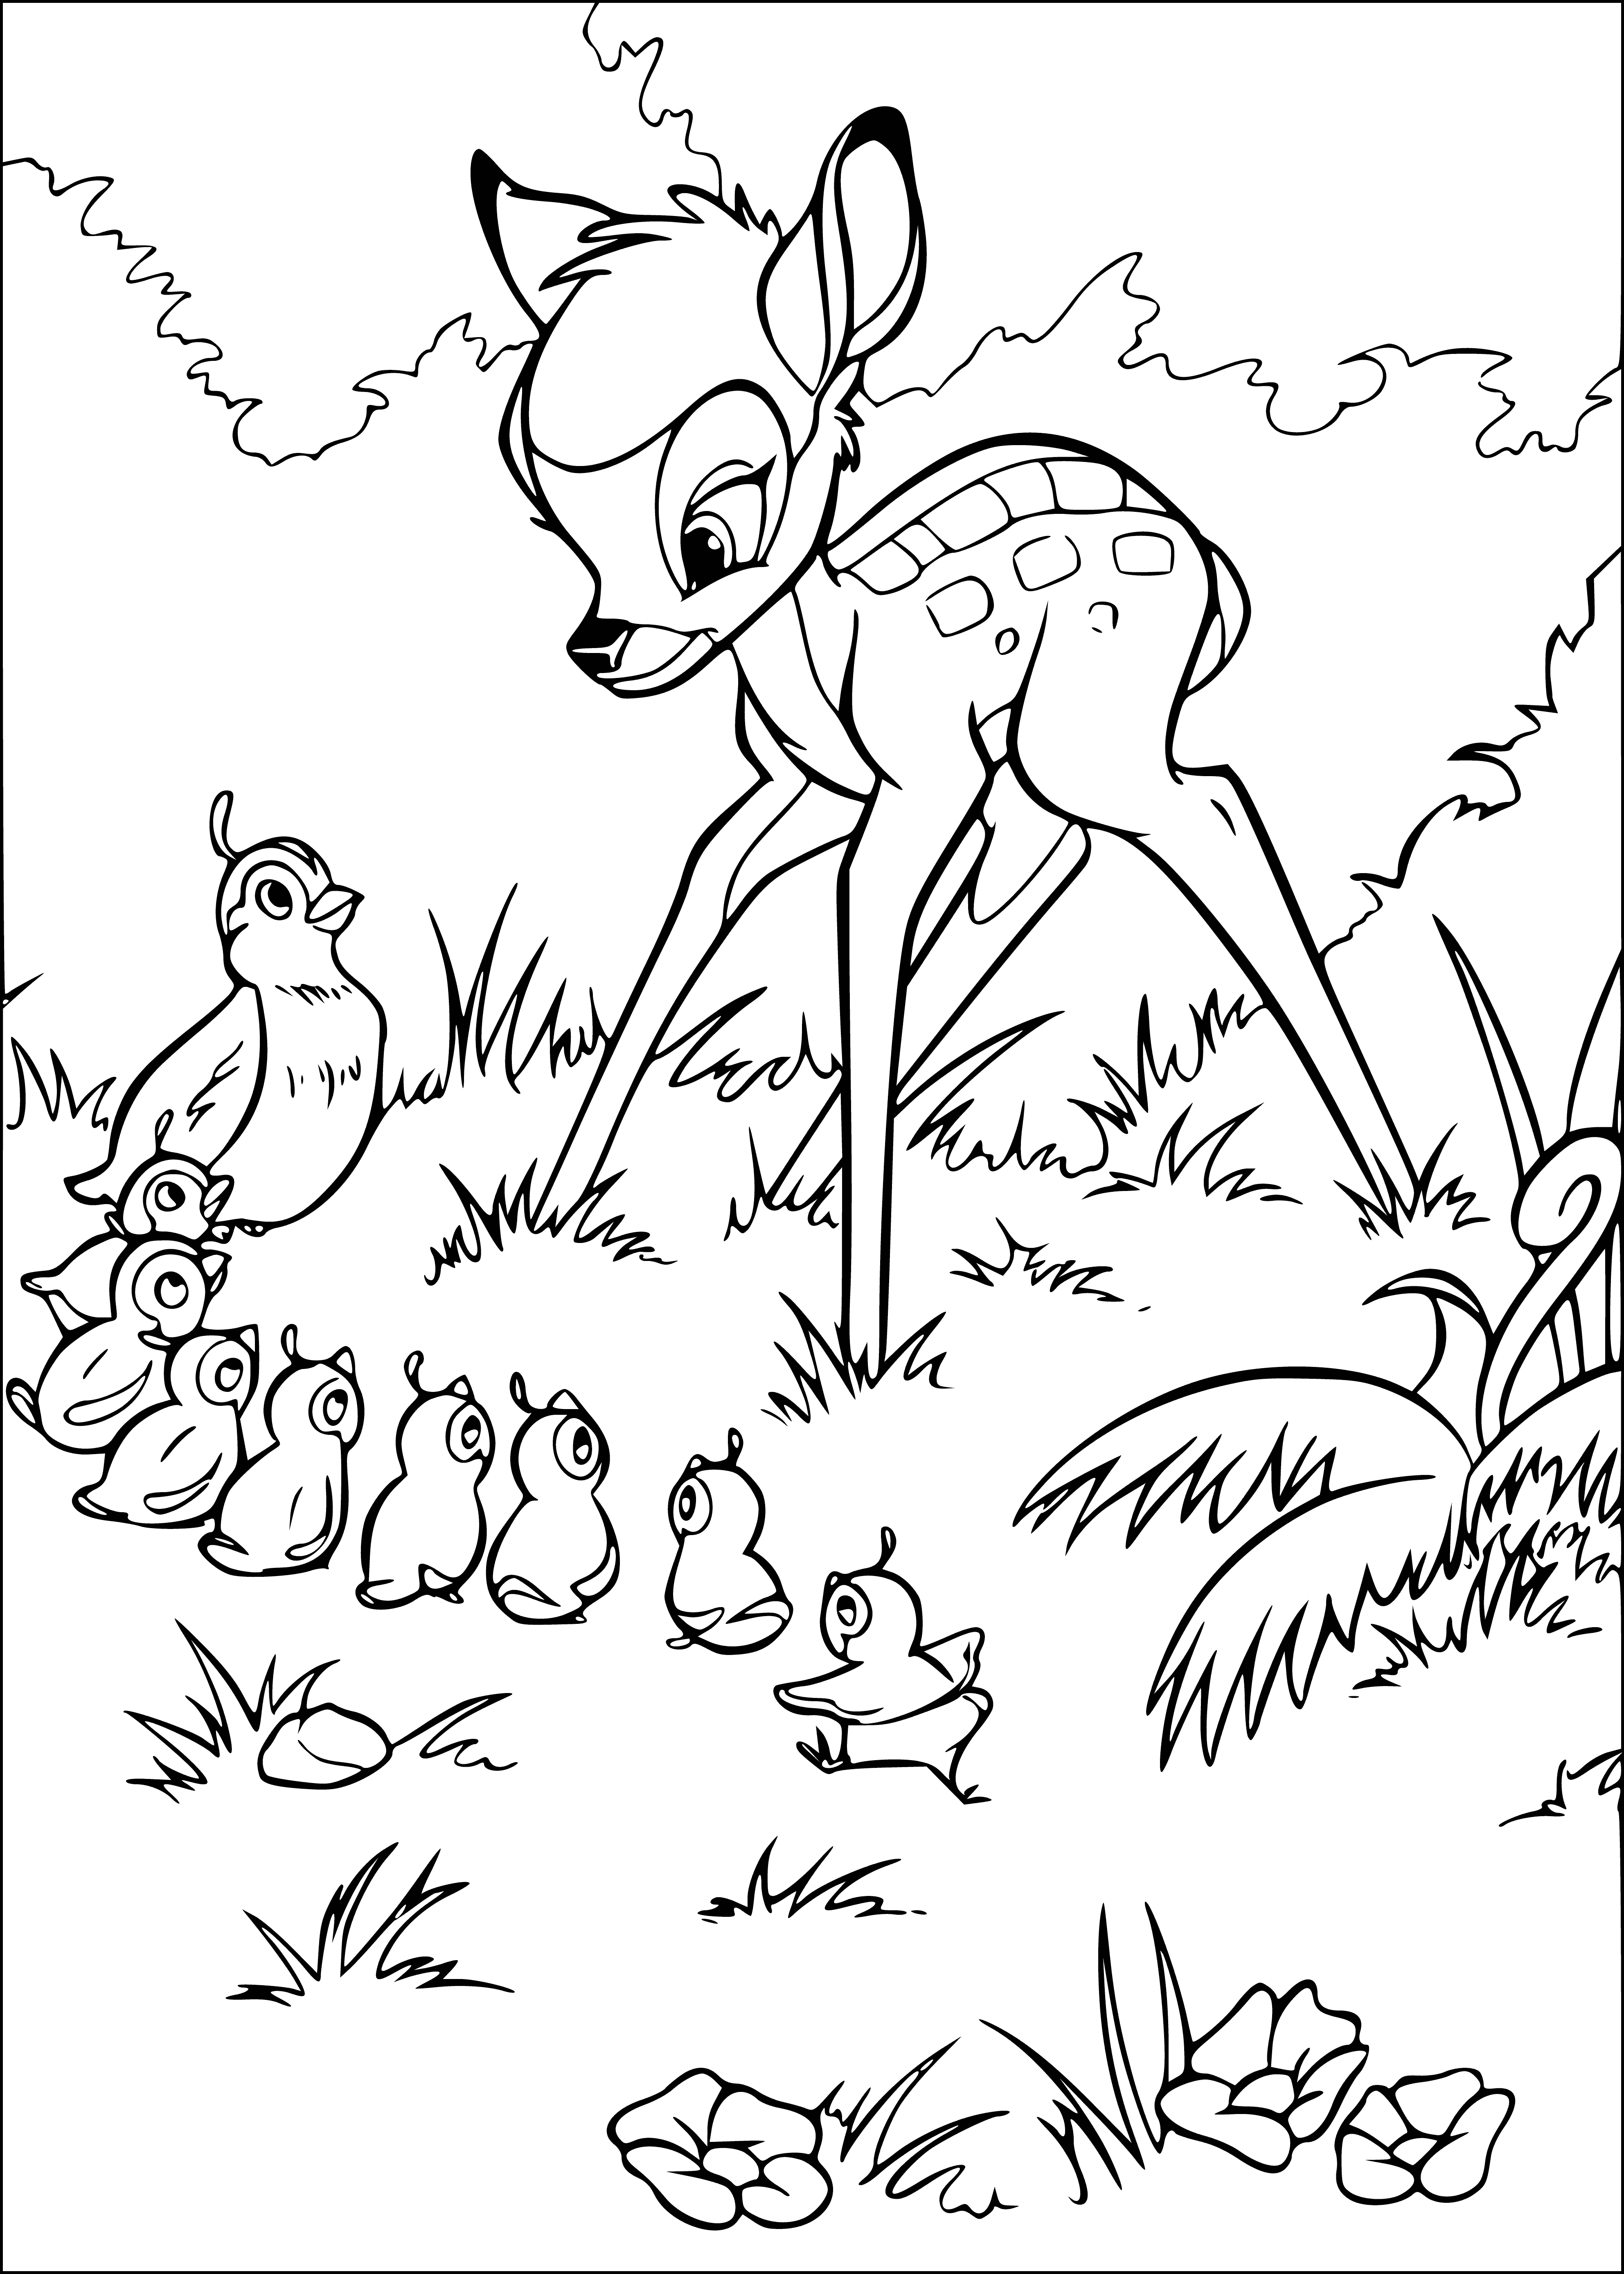 coloring page: Furry brown Bambi stands on a log, looking up as birds fly around in a circle.